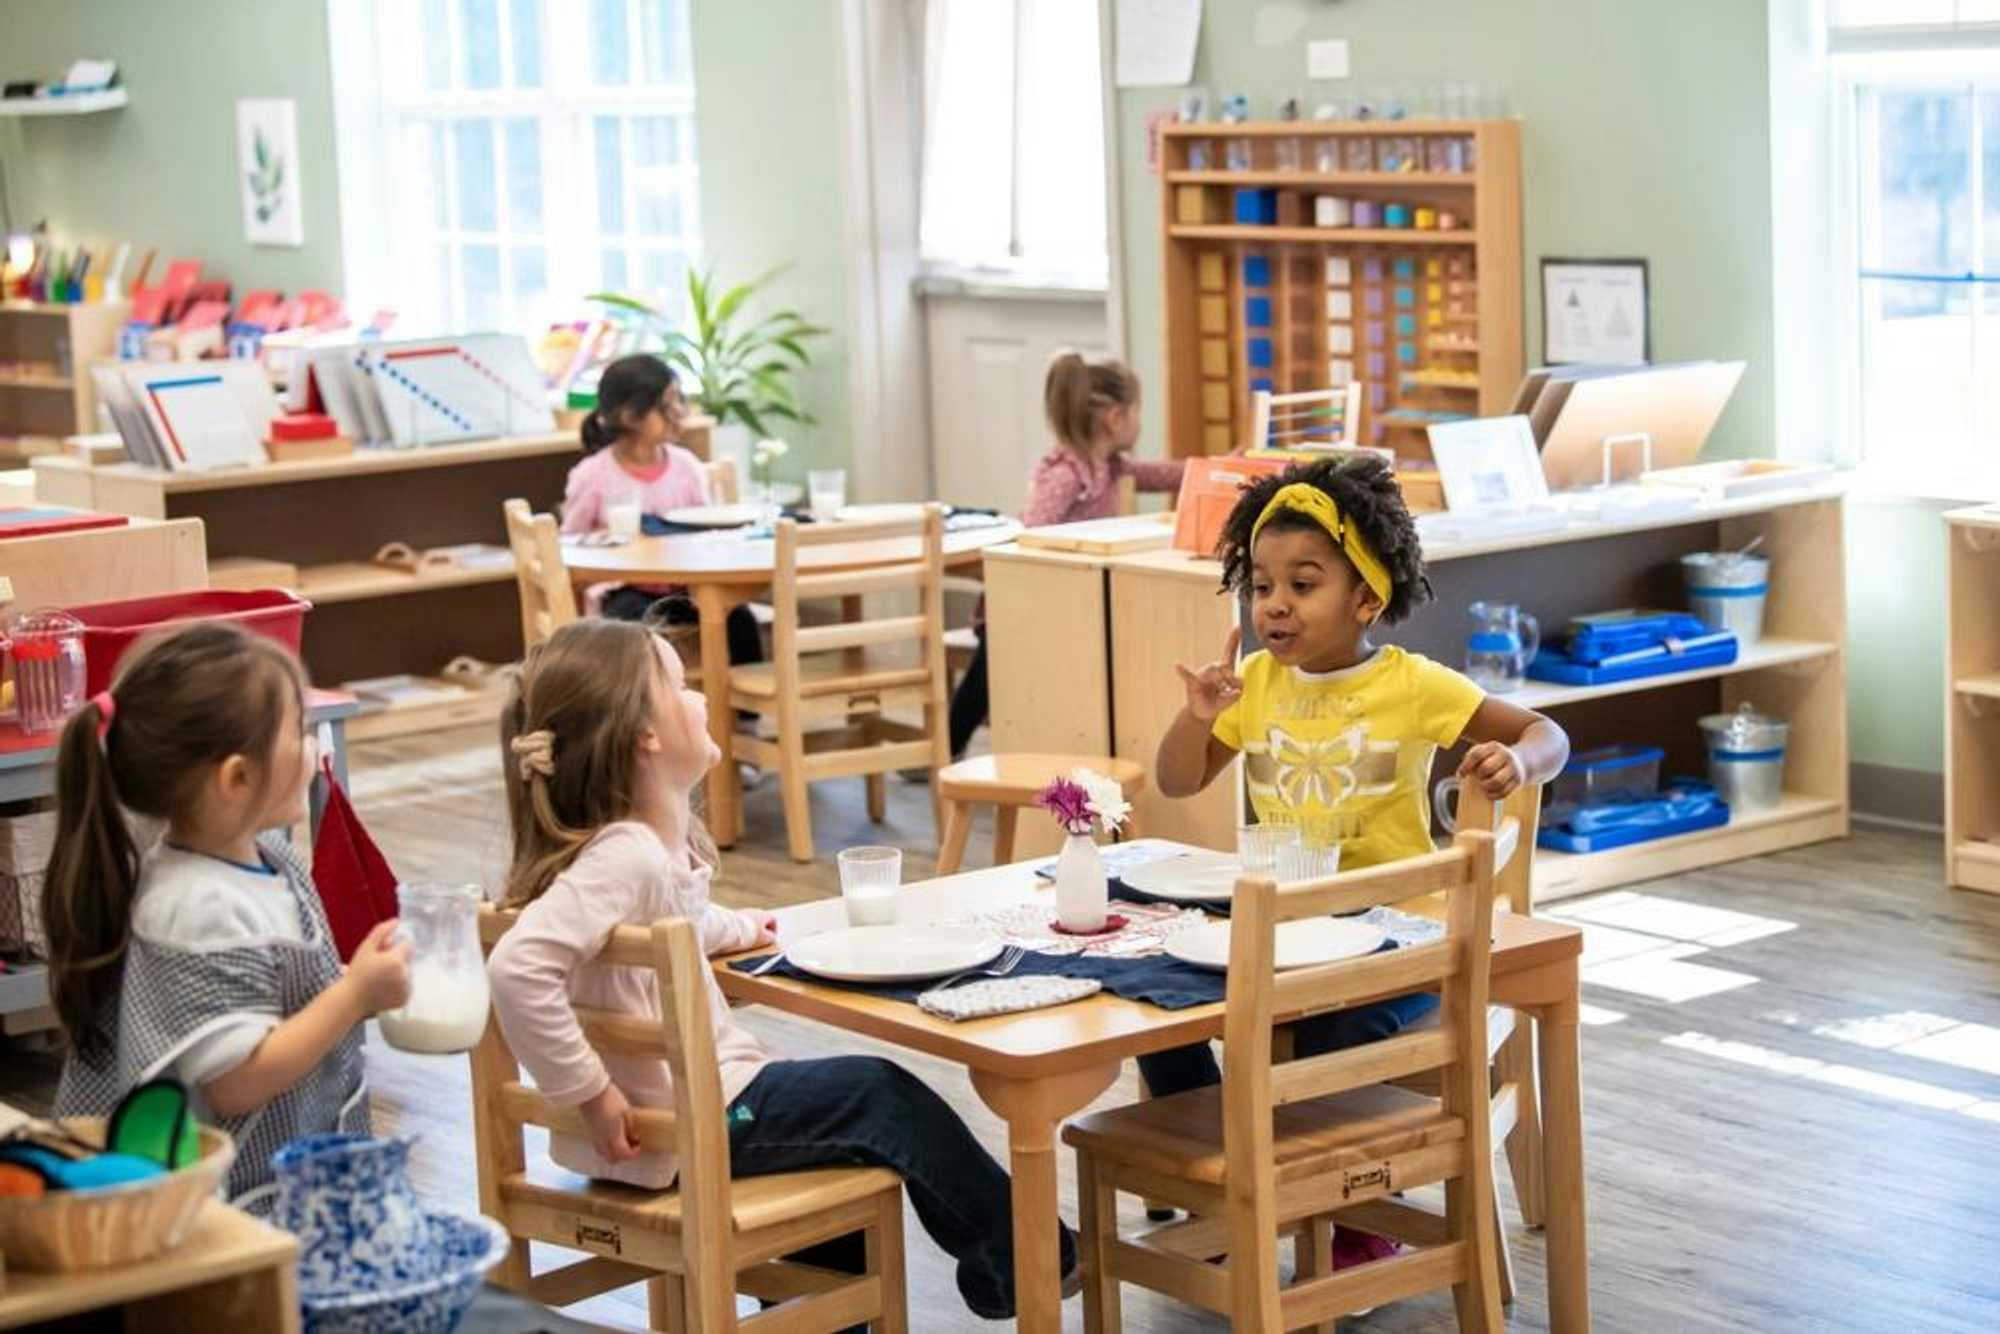 Three kindergarten-aged school girls enjoy a conversation over glasses of milk, while two other students complete activities behind them in the well-organized Montessori classroom